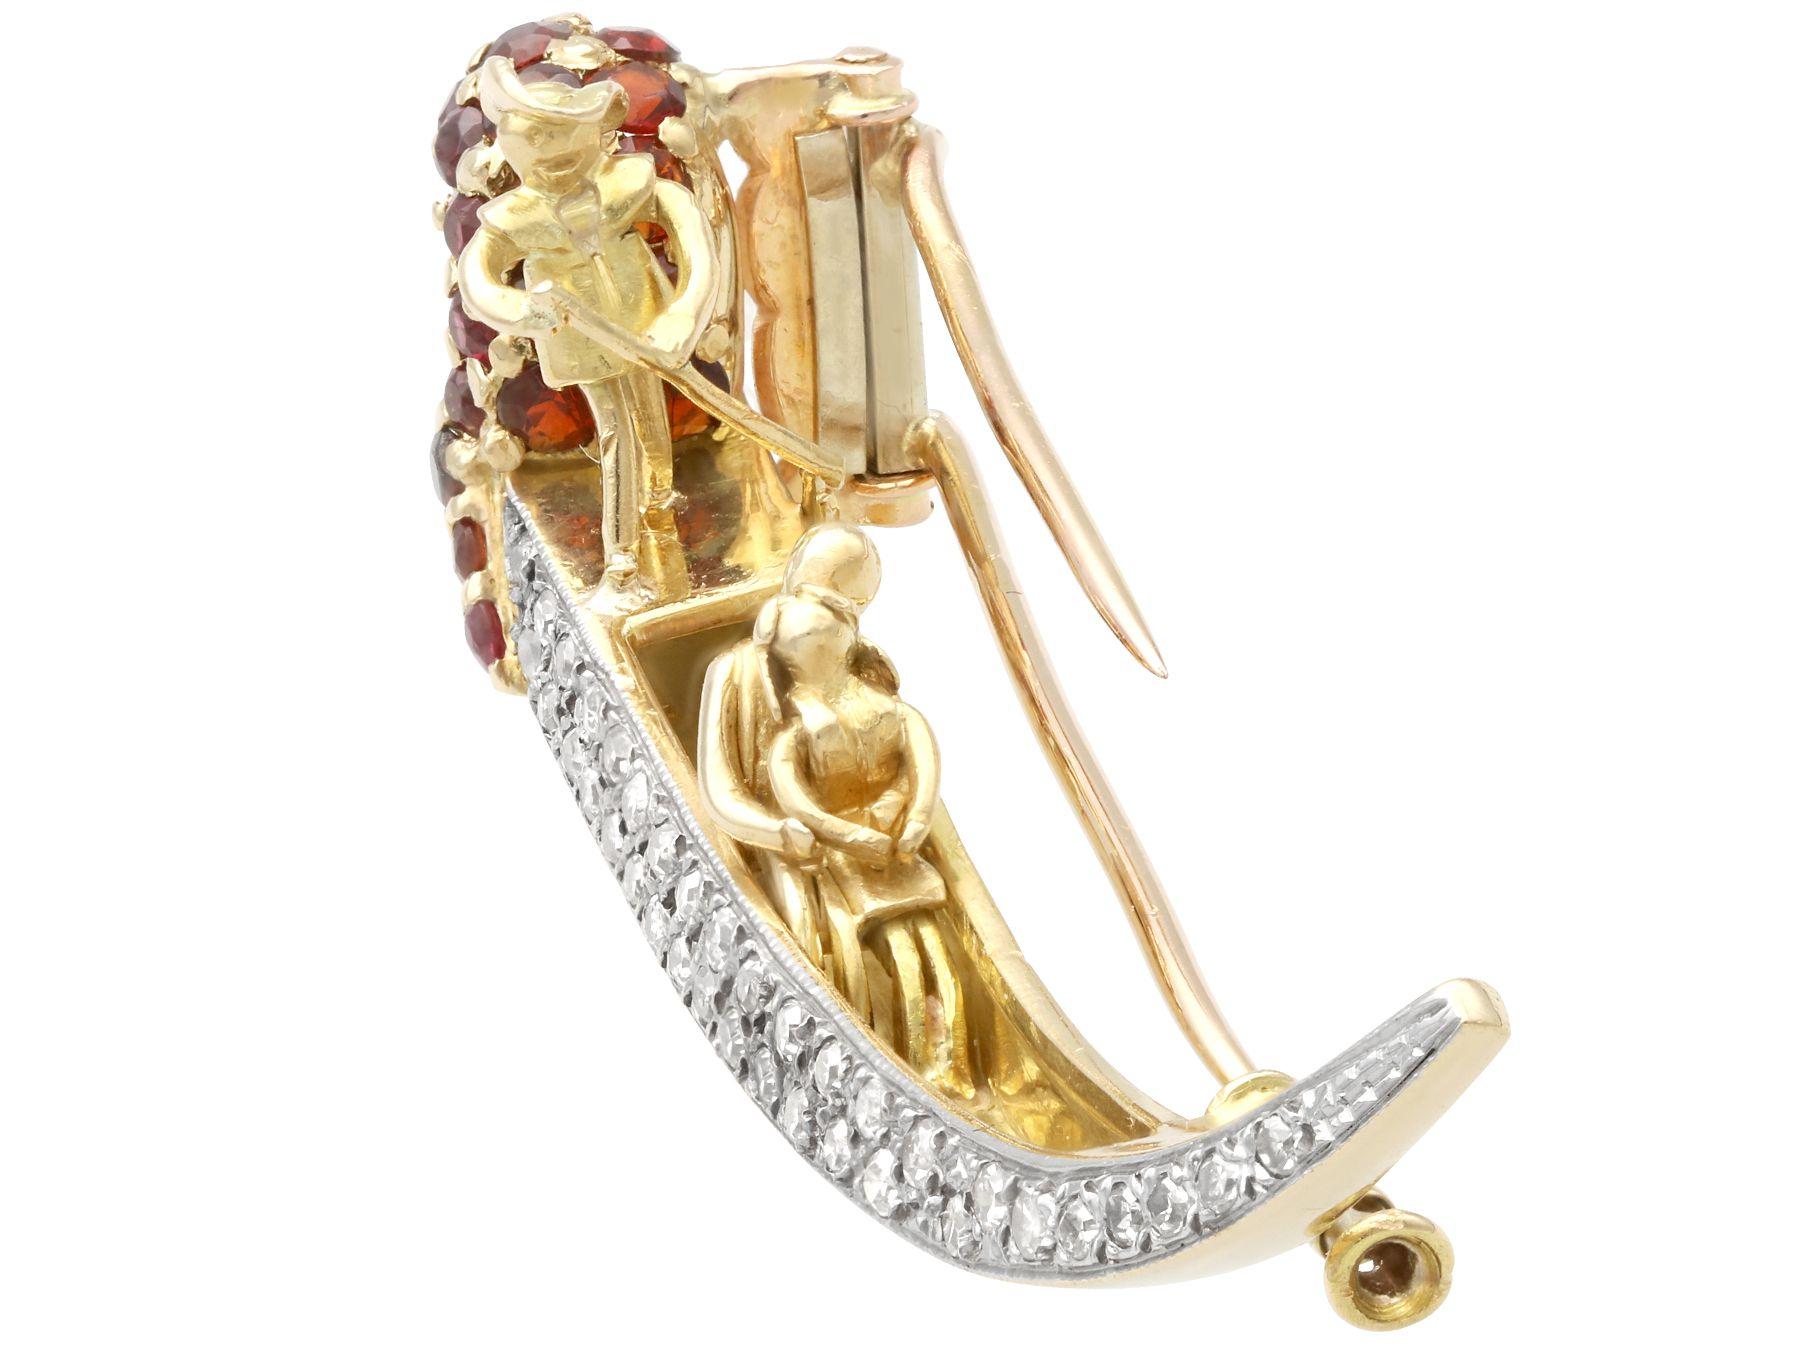 A fine and impressive 0.88 carat diamond, 0.84 carat garnet and 0.02 carat ruby, 18 karat yellow gold and 18 karat white gold set brooch in the form of a gondola; part of our diverse gemstone jewelry collections.

This fine and impressive vintage